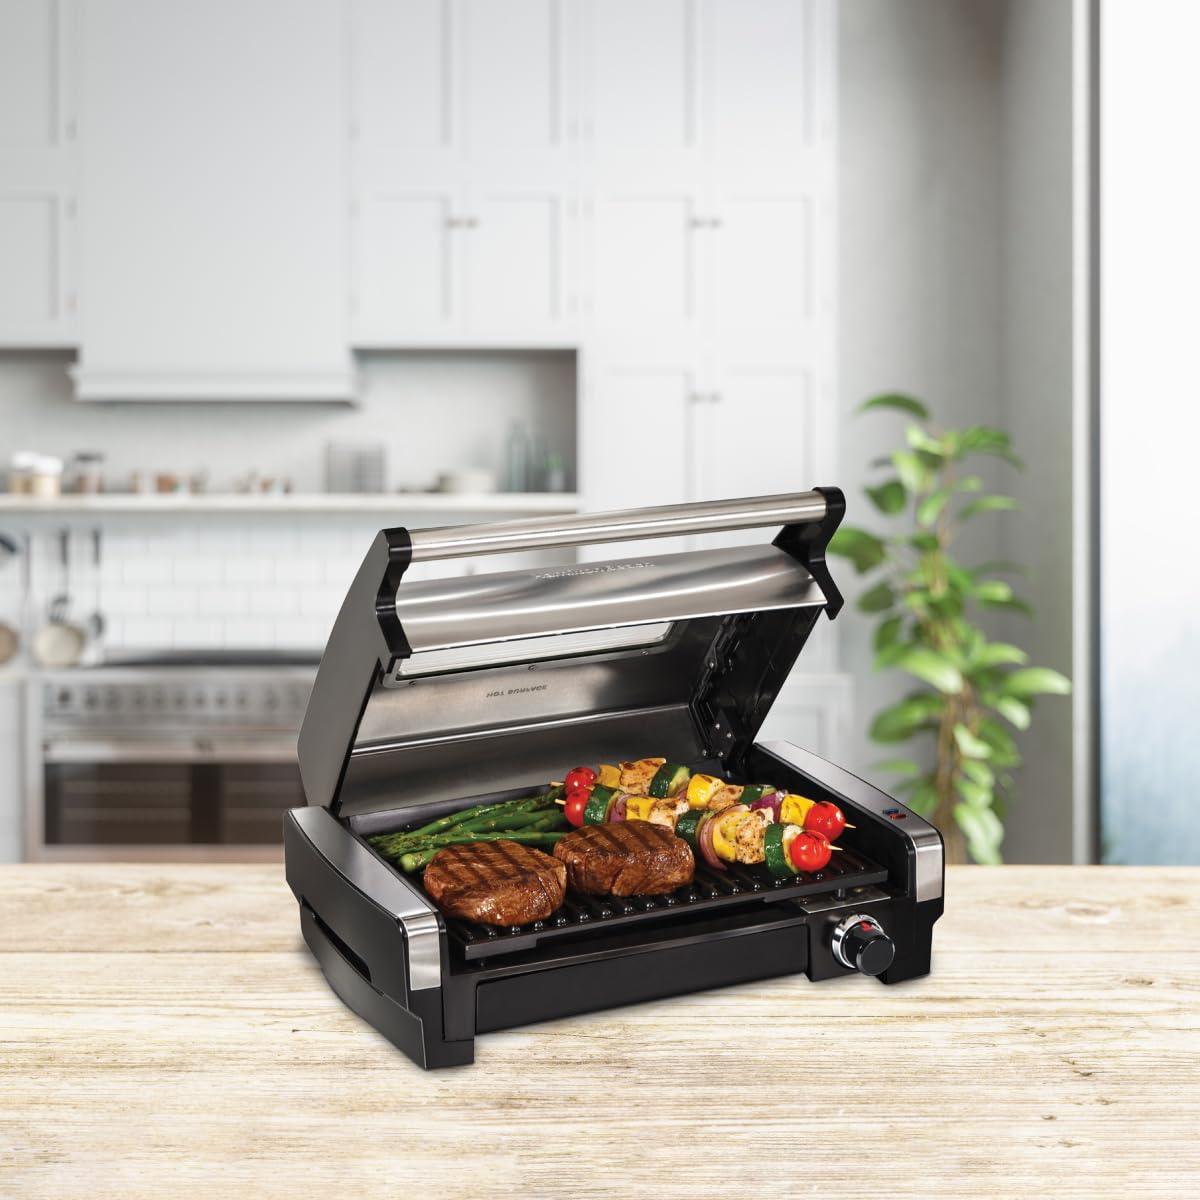 Hamilton Beach Electric Indoor Searing Grill with Viewing Window & Adjustable Temperature Control to 450F, 118 sq. in. Surface Serves 6, Removable Nonstick Grate, Stainless Steel - CookCave